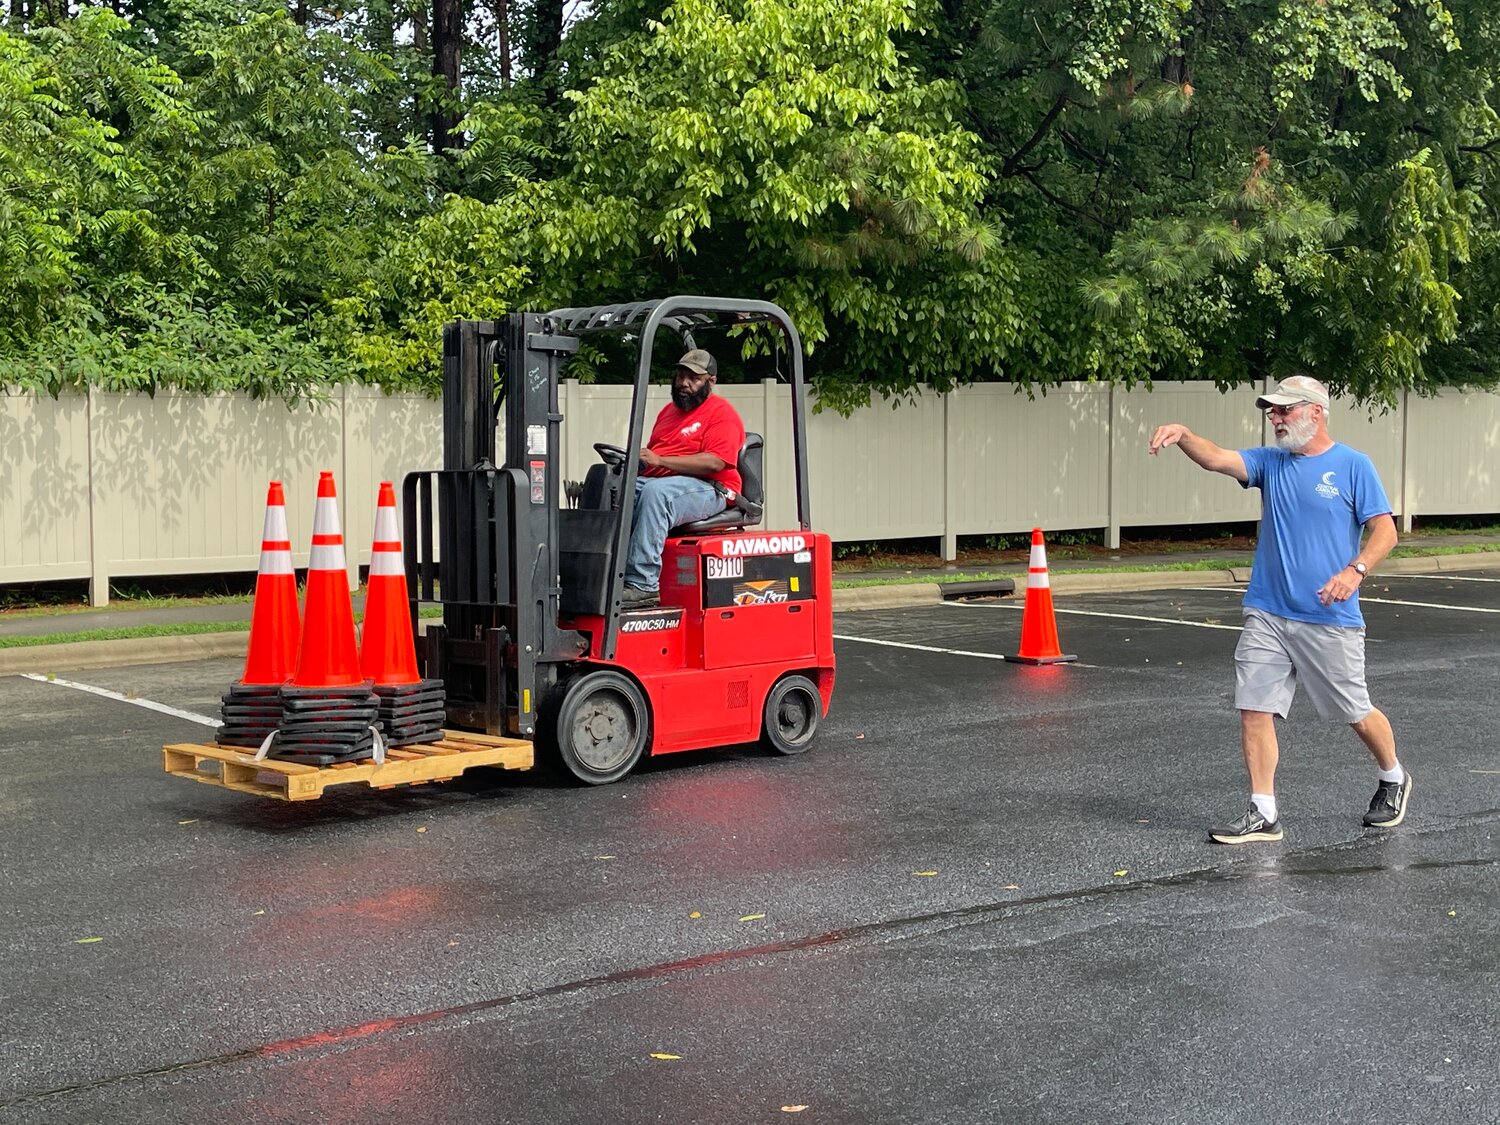 A student zigzags through traffic cones, bringing the forklift back to its initial spot as Rankin helps him through.